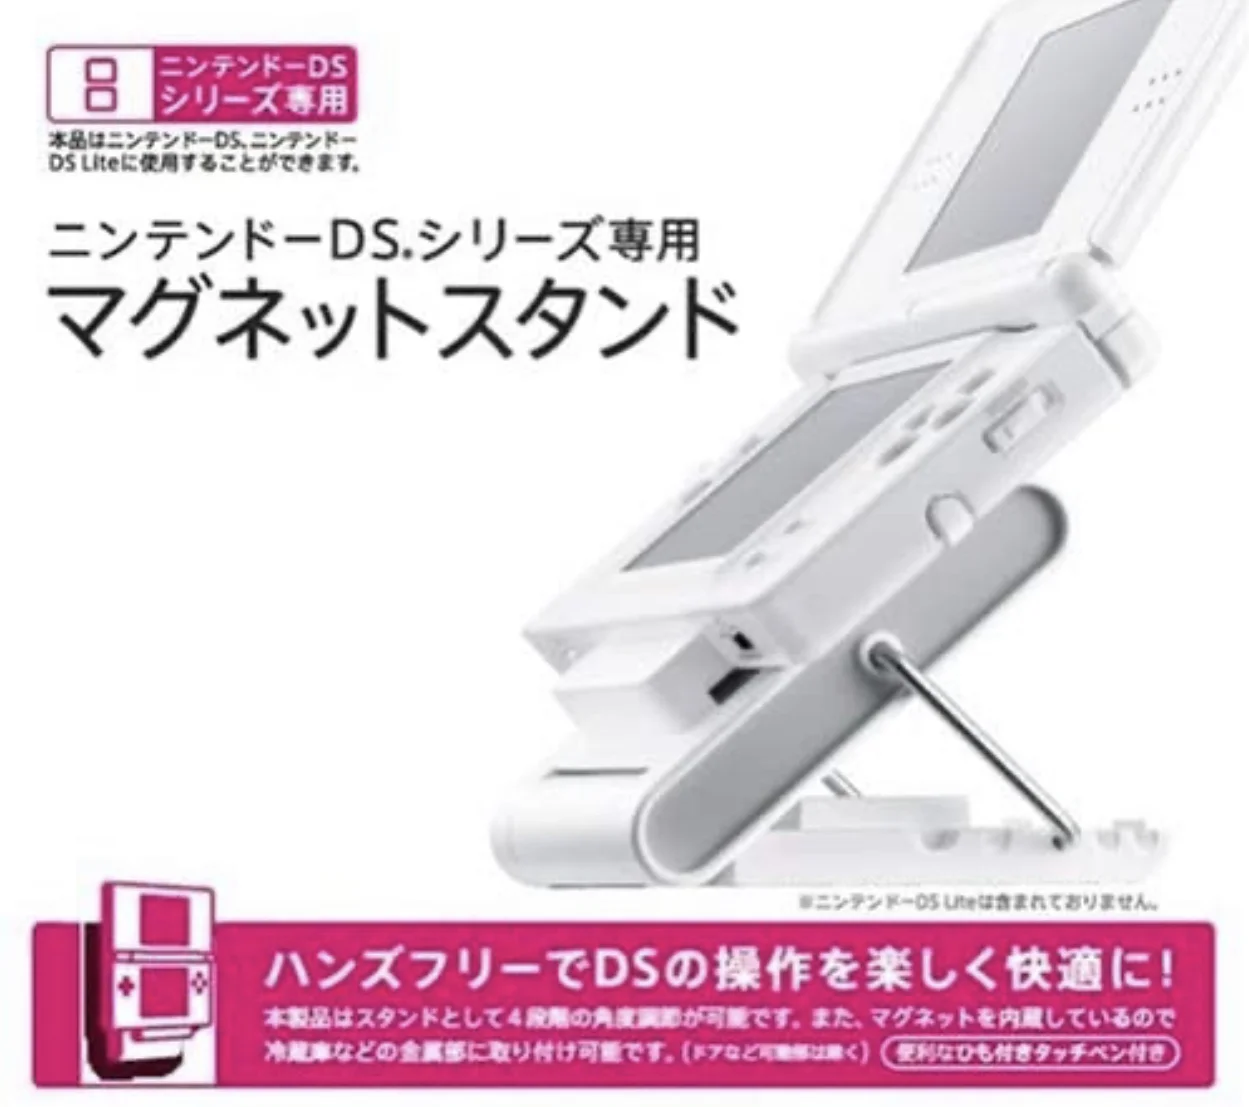  Nintendo DS Magnetic Stand